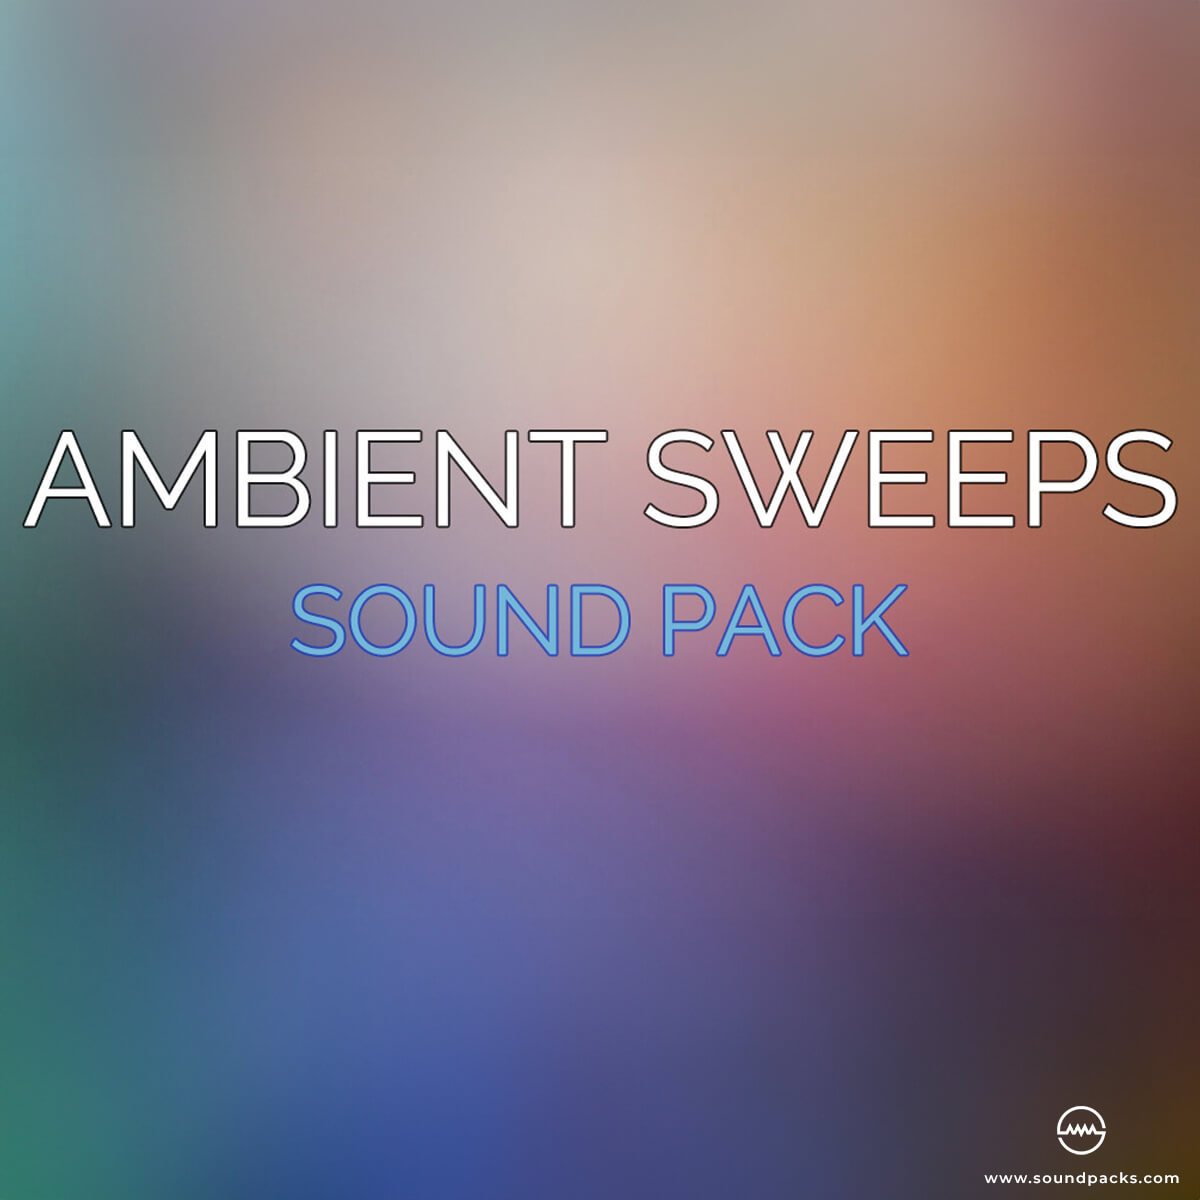 Ambient Sweeps Sound Pack